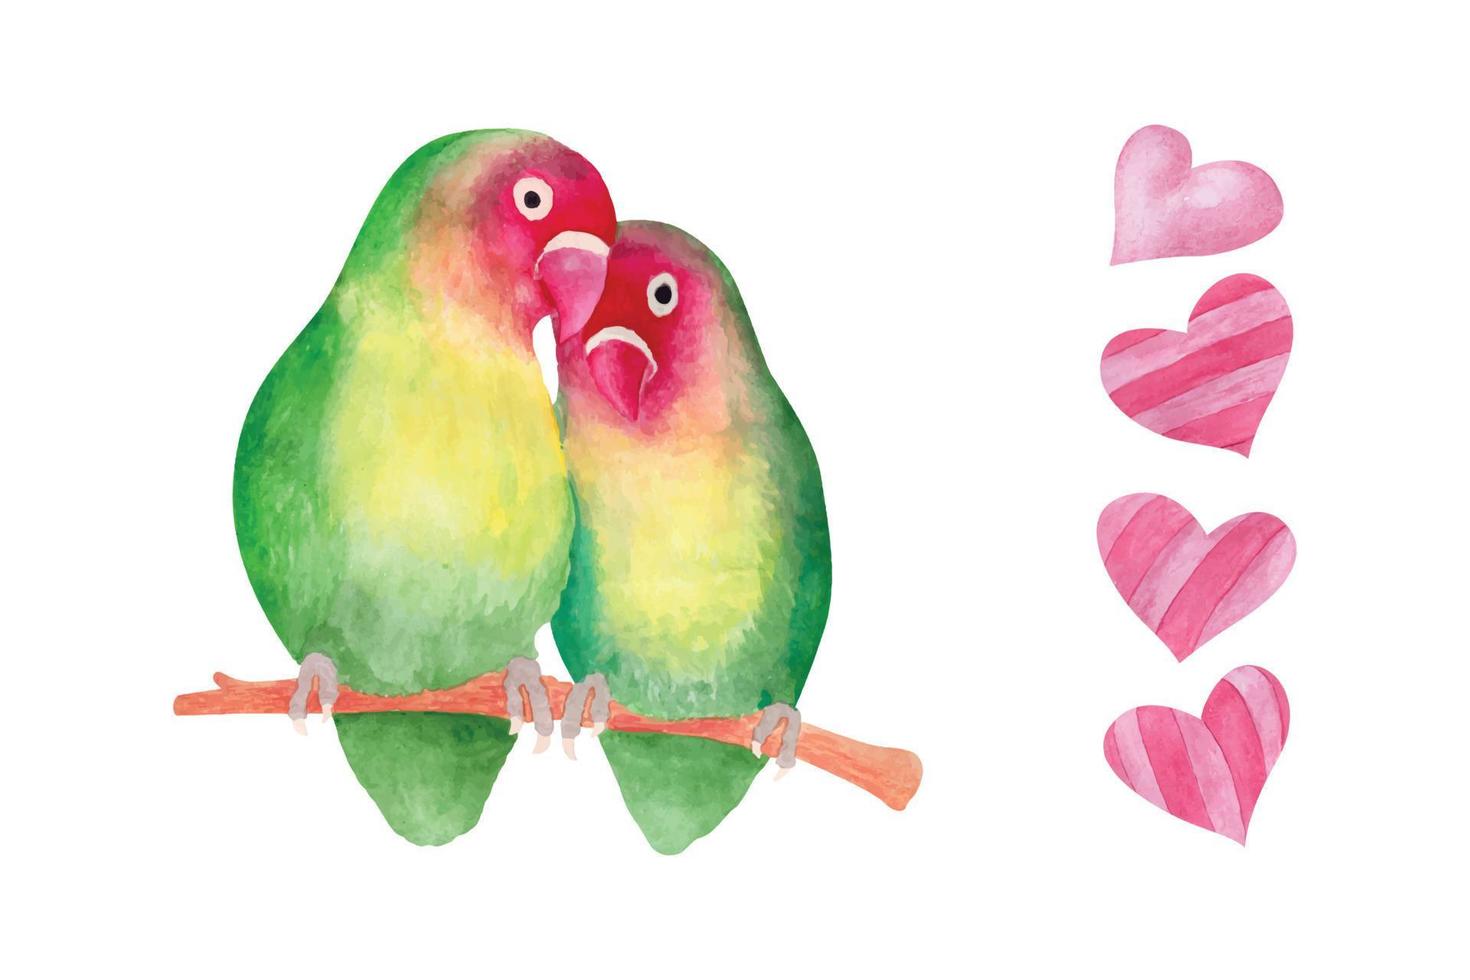 Watercolor valentines day love bird couple, hand drawn watercolor vector illustration for greeting card or invitation design